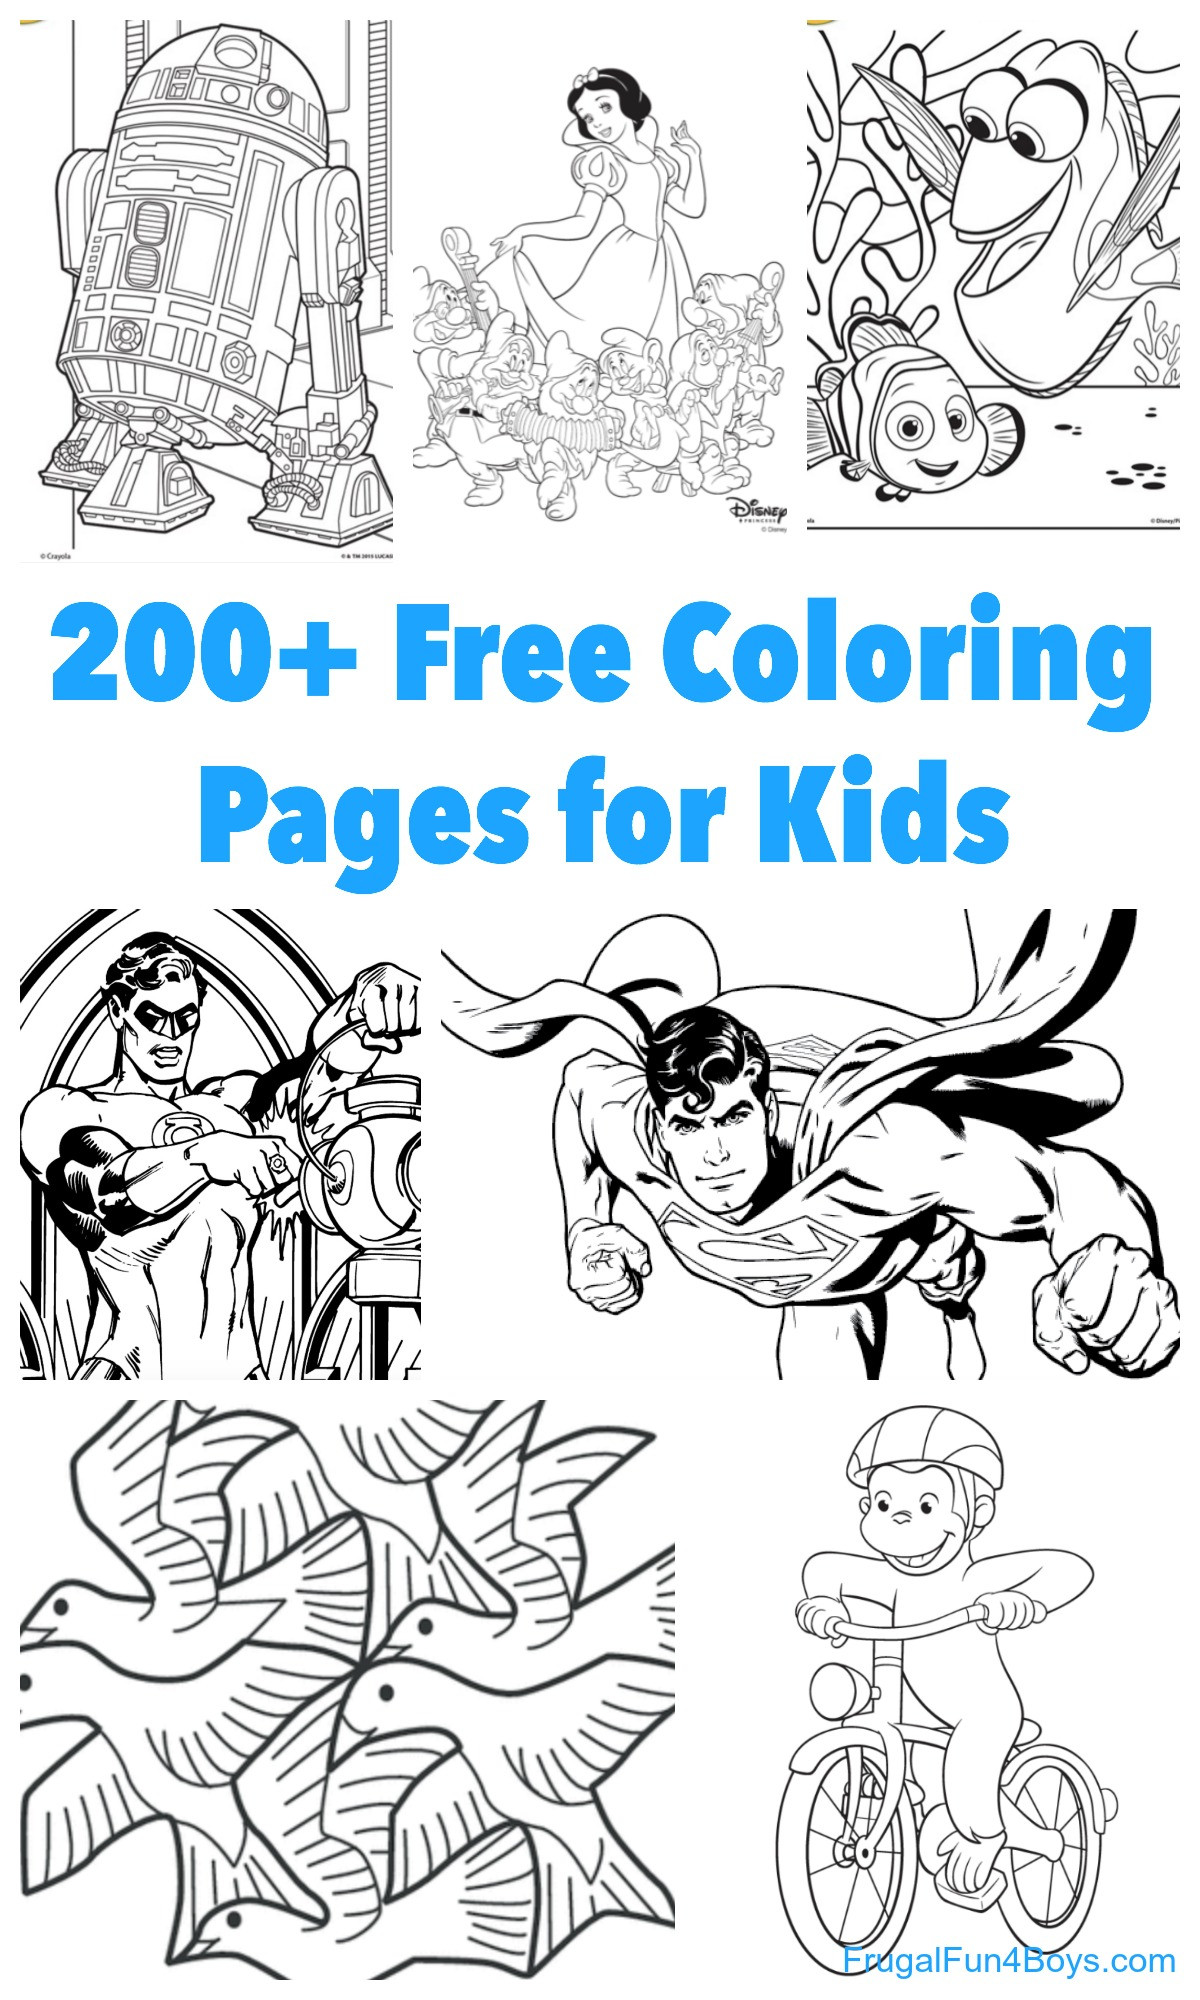 Free Online Coloring Pages For Kids
 200 Printable Coloring Pages for Kids Frugal Fun For